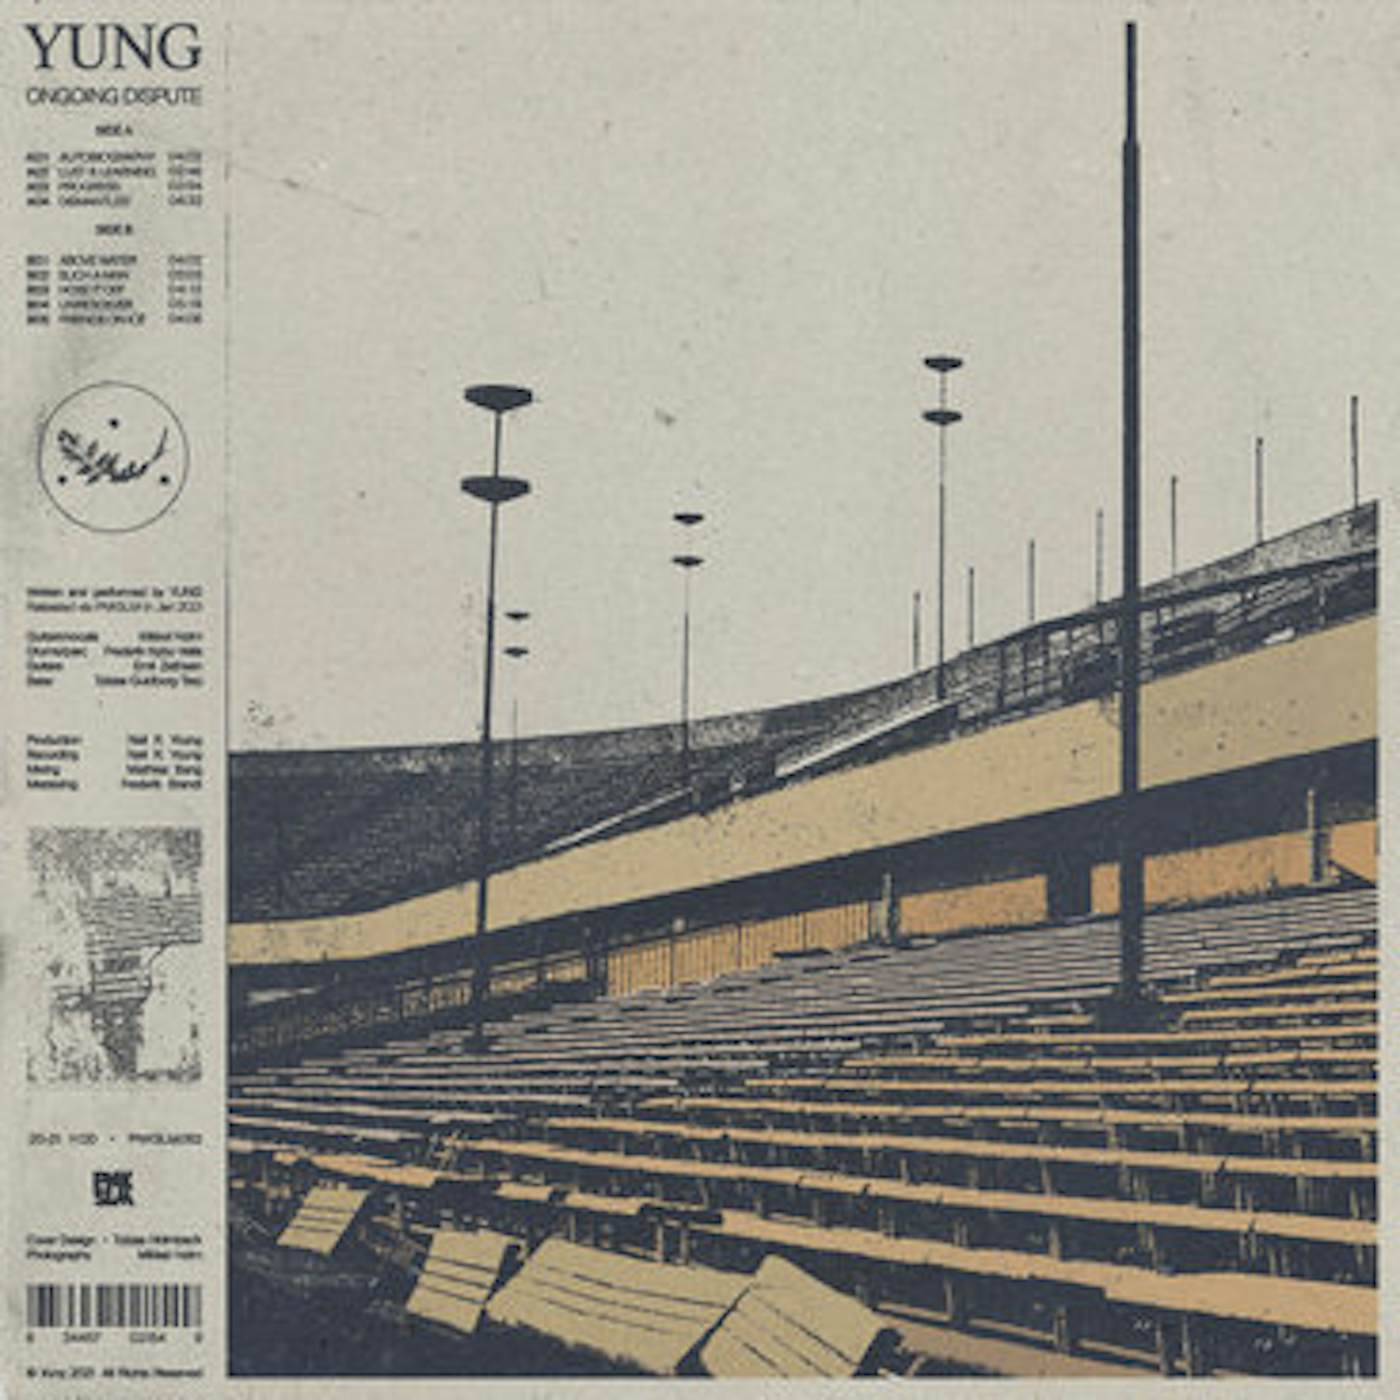 Yung Ongoing Dispute Vinyl Record